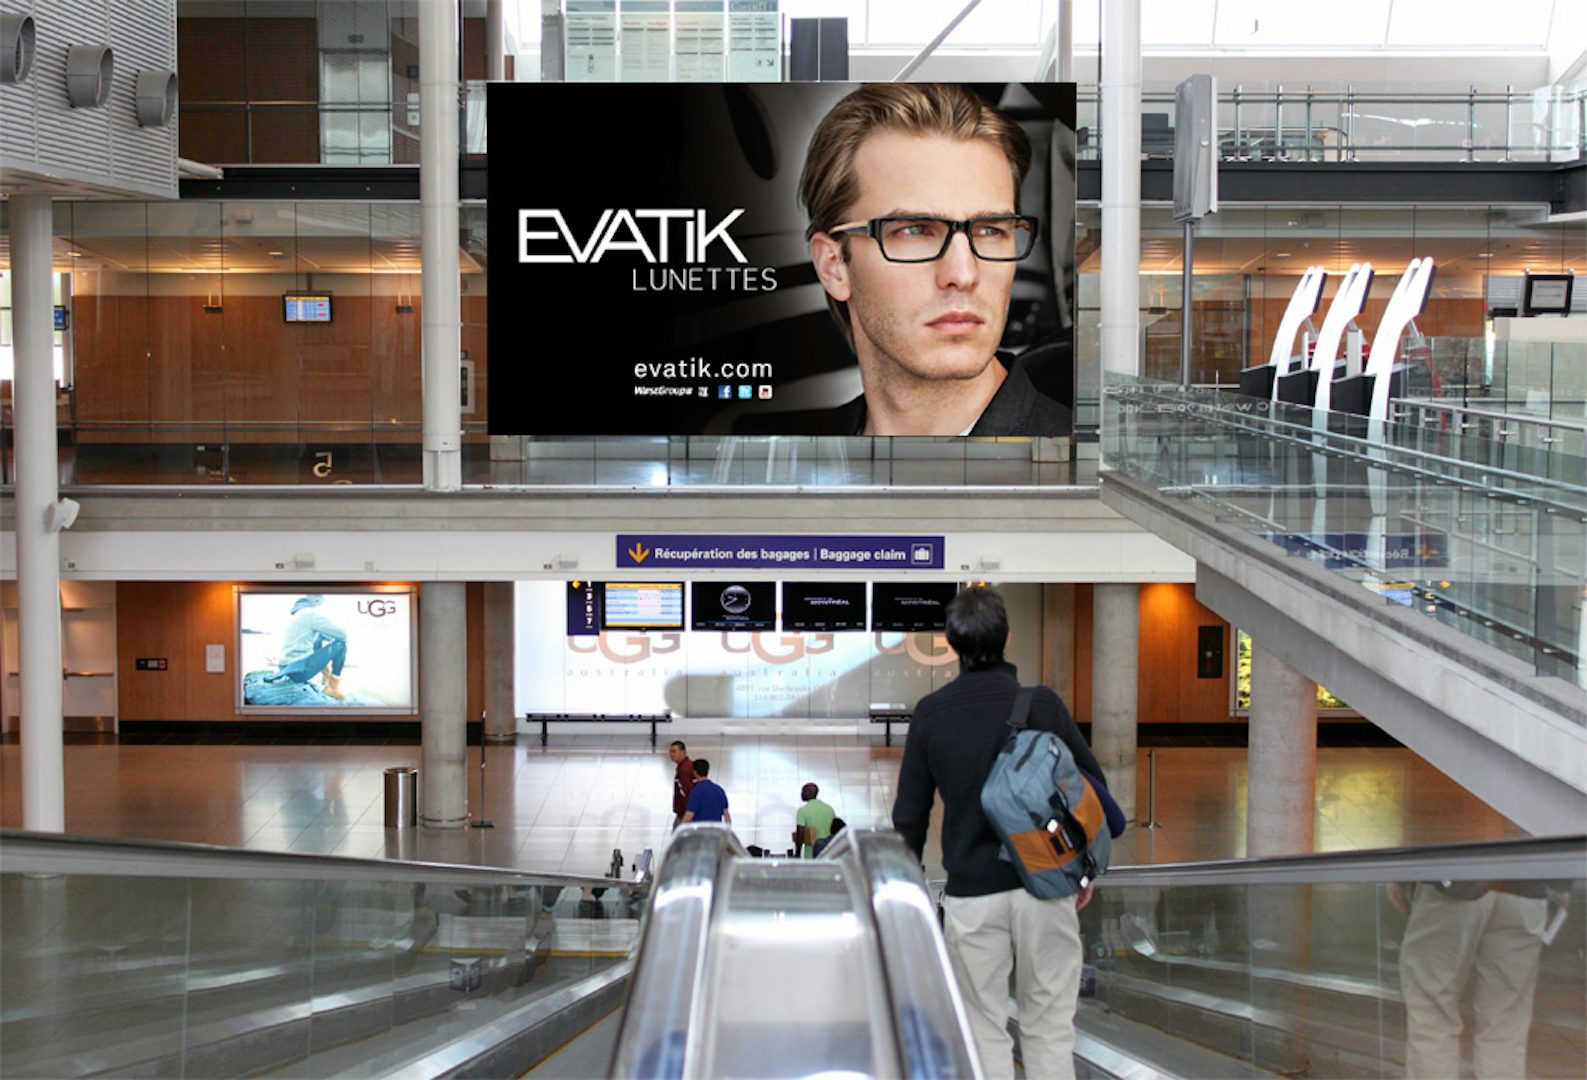 Digital Astral board above an escalator in Montreal airport featuring an Evatik ad